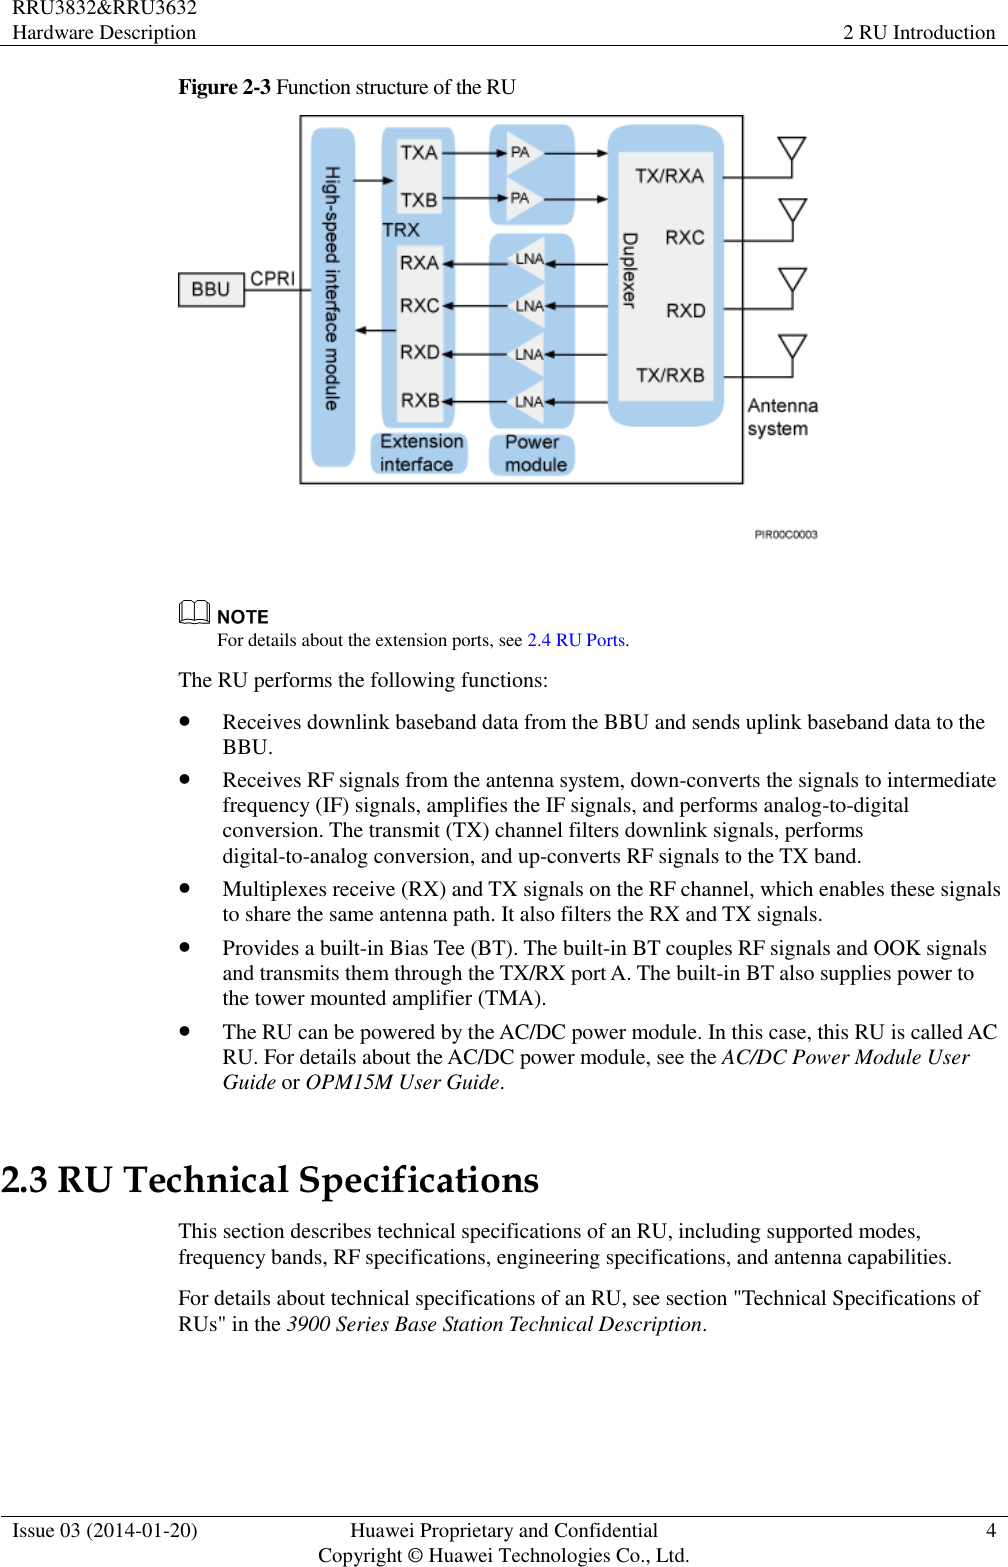 RRU3832&amp;RRU3632 Hardware Description 2 RU Introduction  Issue 03 (2014-01-20) Huawei Proprietary and Confidential                                     Copyright © Huawei Technologies Co., Ltd. 4  Figure 2-3 Function structure of the RU    For details about the extension ports, see 2.4 RU Ports. The RU performs the following functions:  Receives downlink baseband data from the BBU and sends uplink baseband data to the BBU.  Receives RF signals from the antenna system, down-converts the signals to intermediate frequency (IF) signals, amplifies the IF signals, and performs analog-to-digital conversion. The transmit (TX) channel filters downlink signals, performs digital-to-analog conversion, and up-converts RF signals to the TX band.  Multiplexes receive (RX) and TX signals on the RF channel, which enables these signals to share the same antenna path. It also filters the RX and TX signals.  Provides a built-in Bias Tee (BT). The built-in BT couples RF signals and OOK signals and transmits them through the TX/RX port A. The built-in BT also supplies power to the tower mounted amplifier (TMA).  The RU can be powered by the AC/DC power module. In this case, this RU is called AC RU. For details about the AC/DC power module, see the AC/DC Power Module User Guide or OPM15M User Guide. 2.3 RU Technical Specifications This section describes technical specifications of an RU, including supported modes, frequency bands, RF specifications, engineering specifications, and antenna capabilities. For details about technical specifications of an RU, see section &quot;Technical Specifications of RUs&quot; in the 3900 Series Base Station Technical Description. 